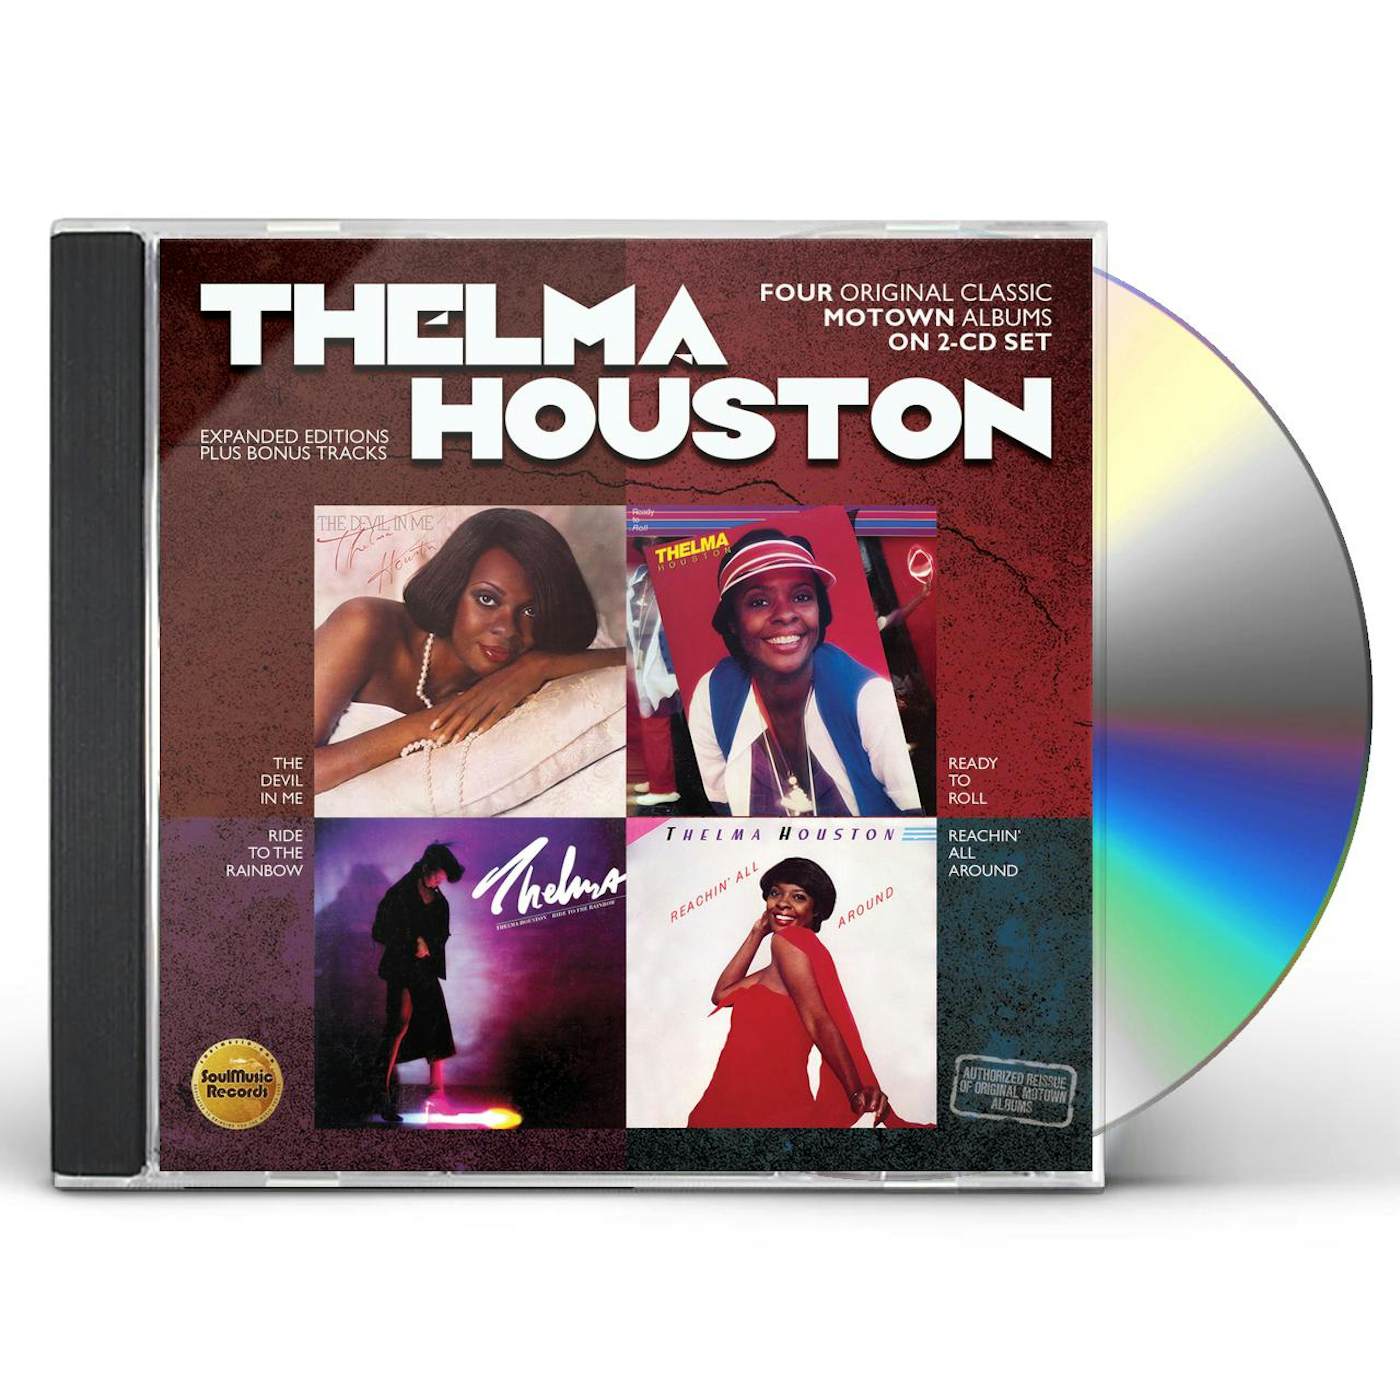 Thelma Houston DEVIL IN ME / READY TO ROLL / RIDE TO THE RAINBOW CD